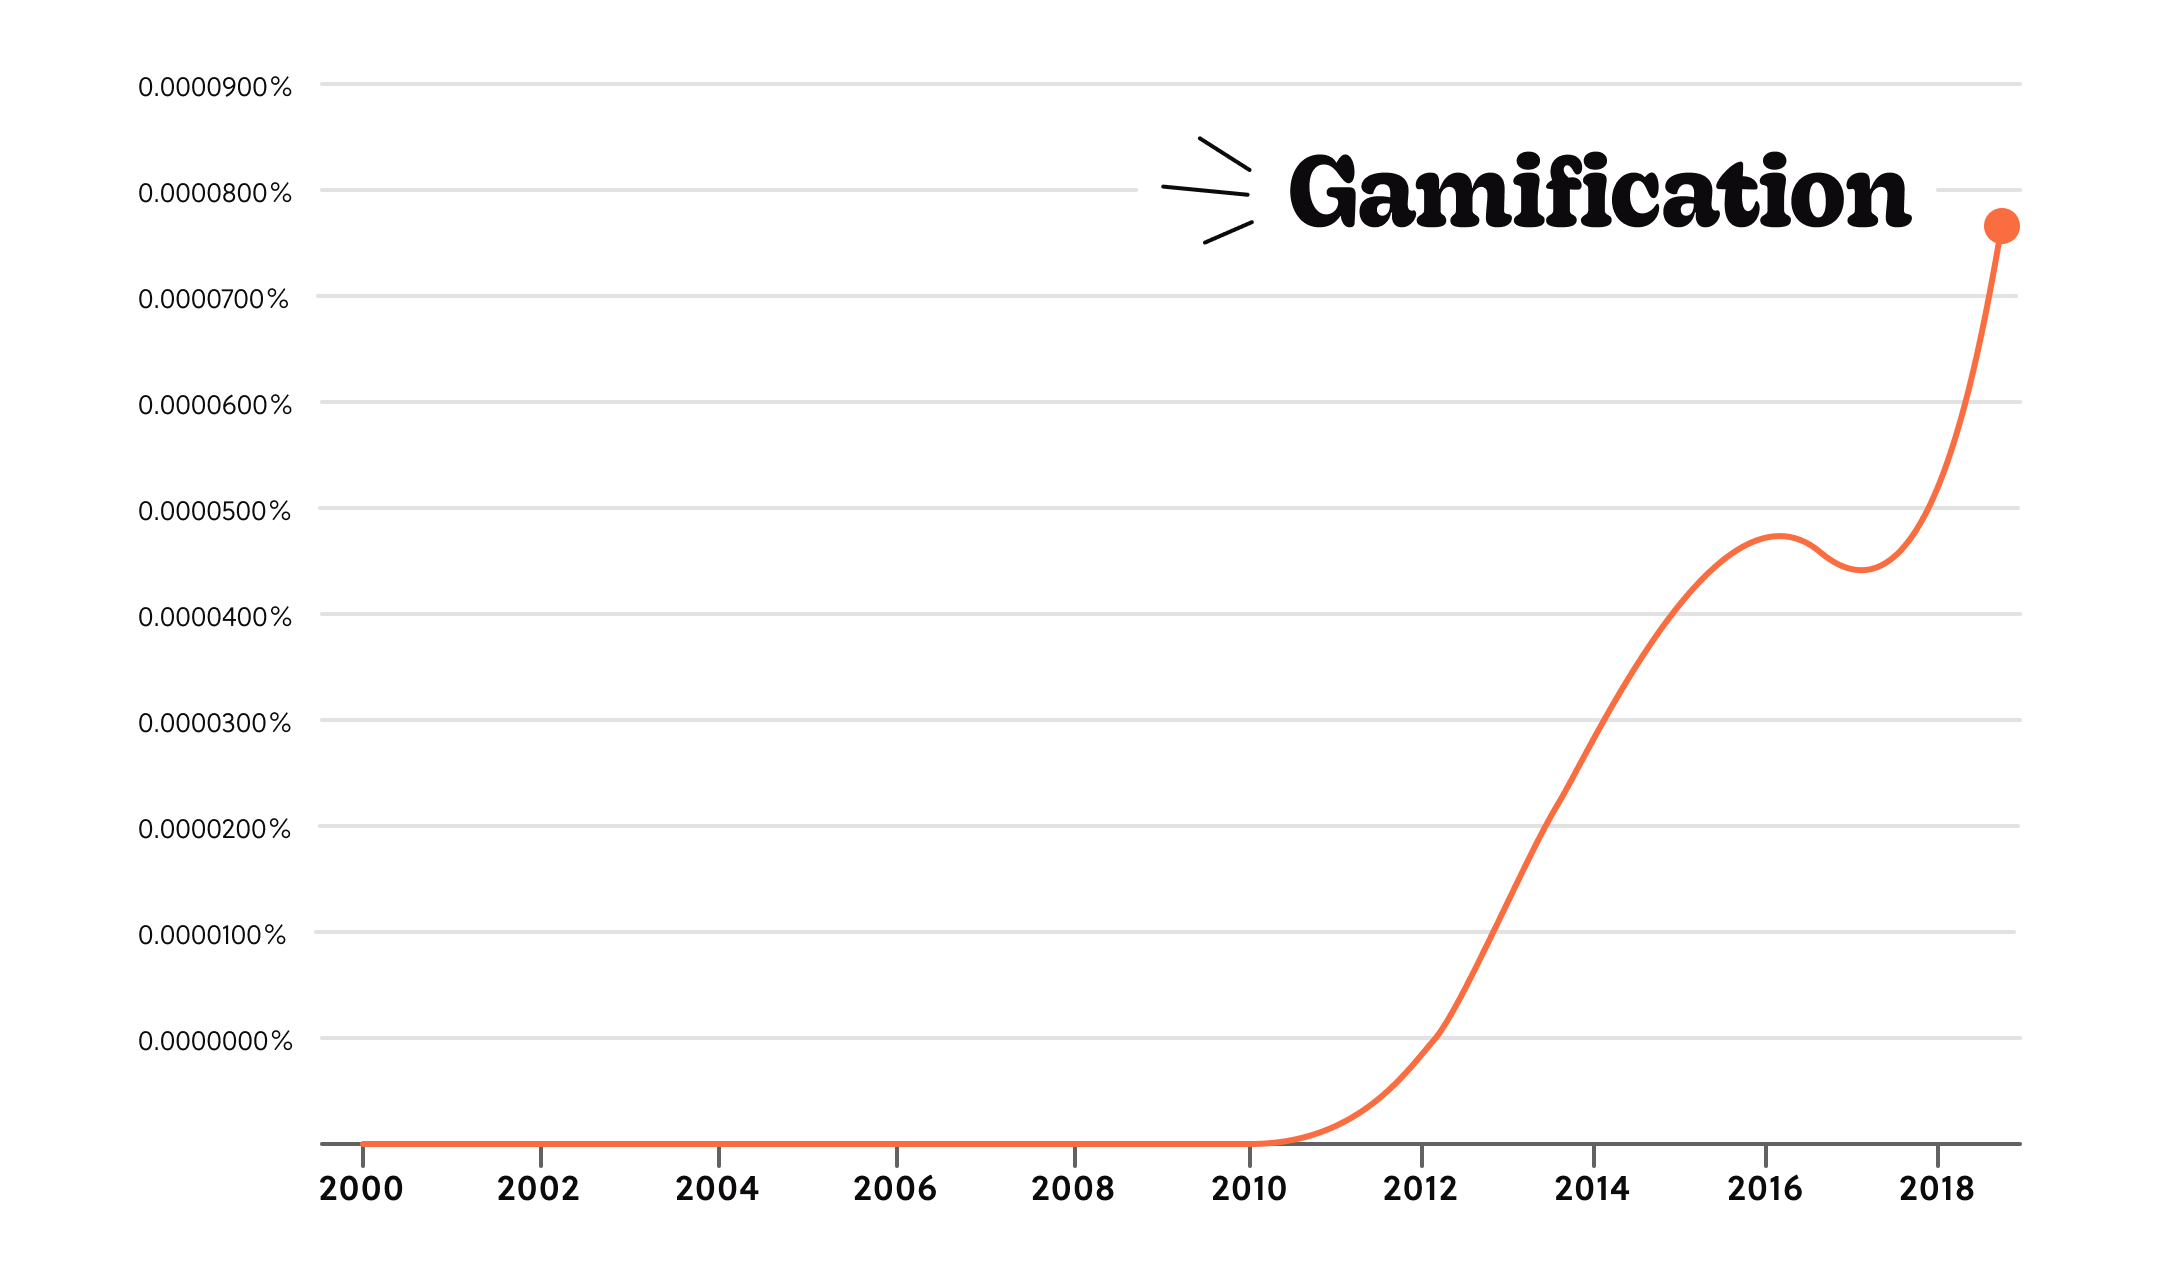 Line graph showing the trend of the term "gamification" appearing in books since 2000. The line rises sharply starting in 2010.